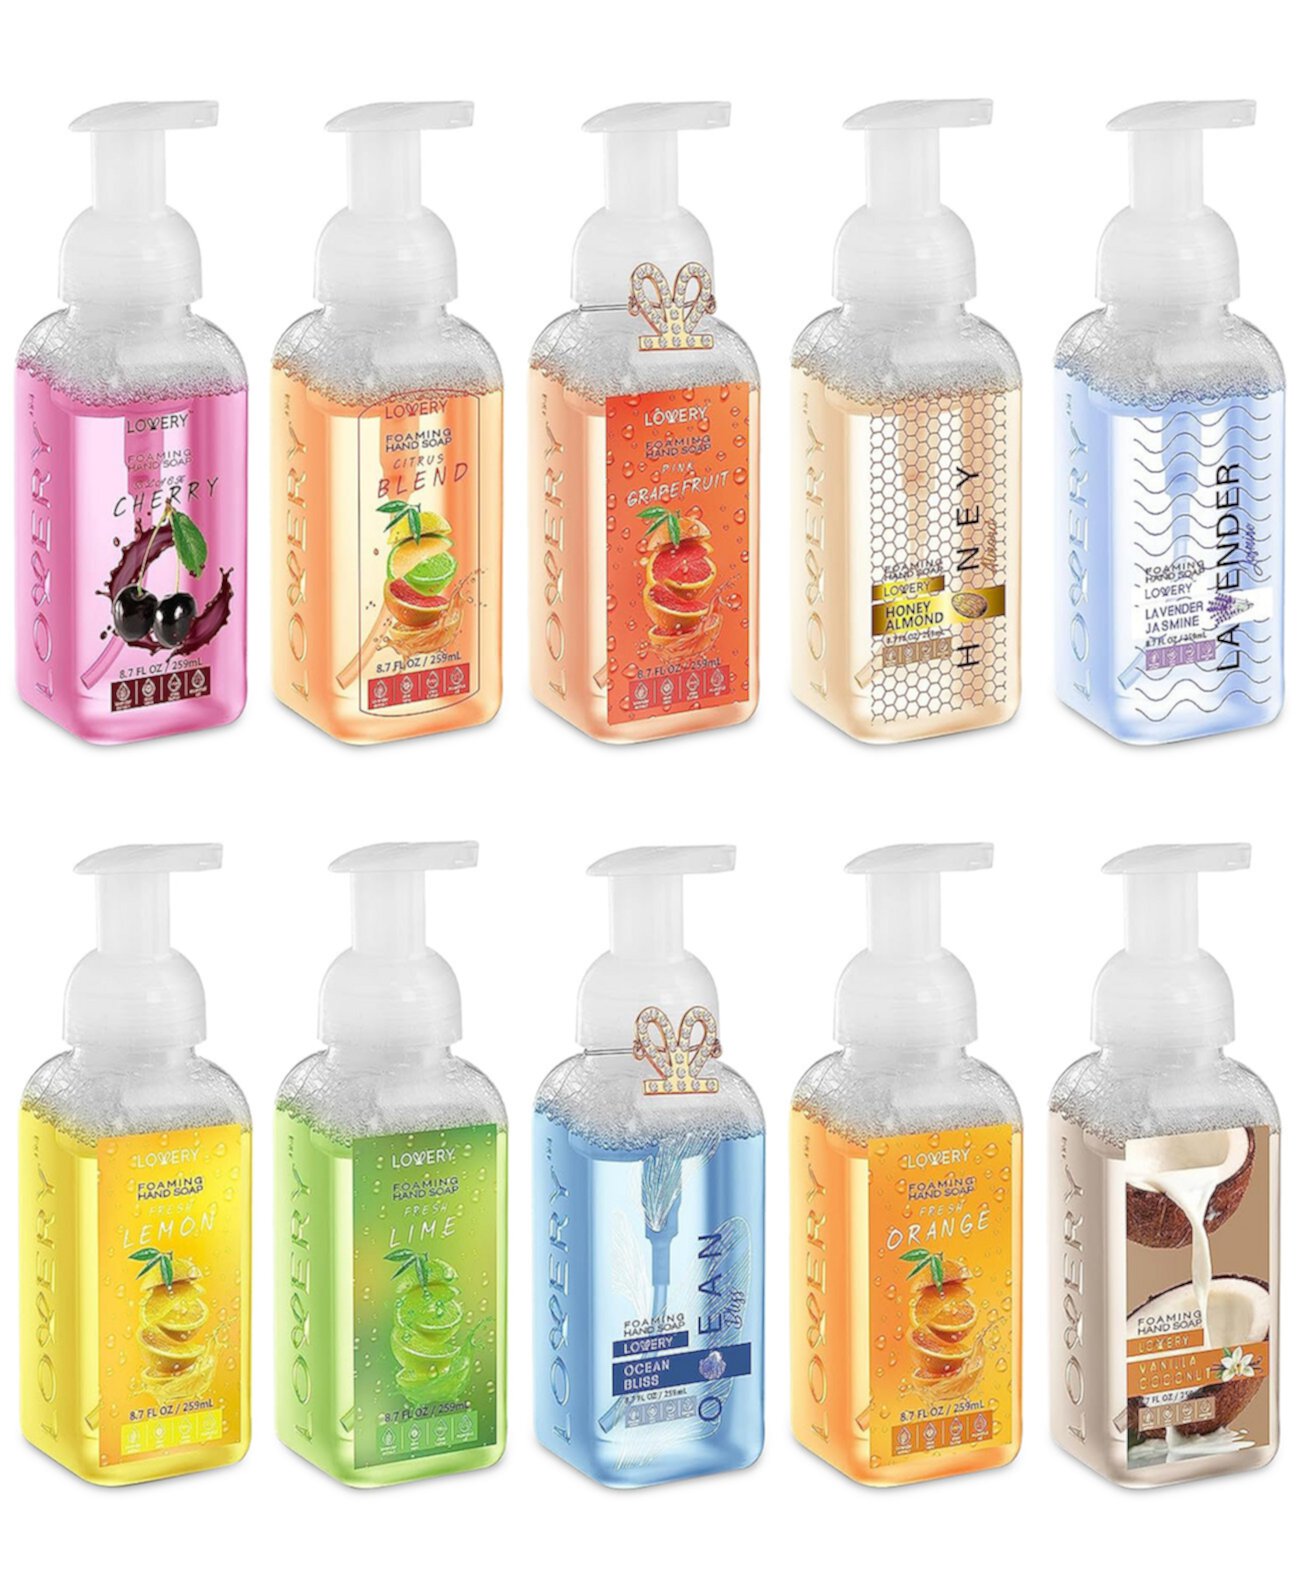 10-Pc. Foaming Hand Soap Gift Set Lovery